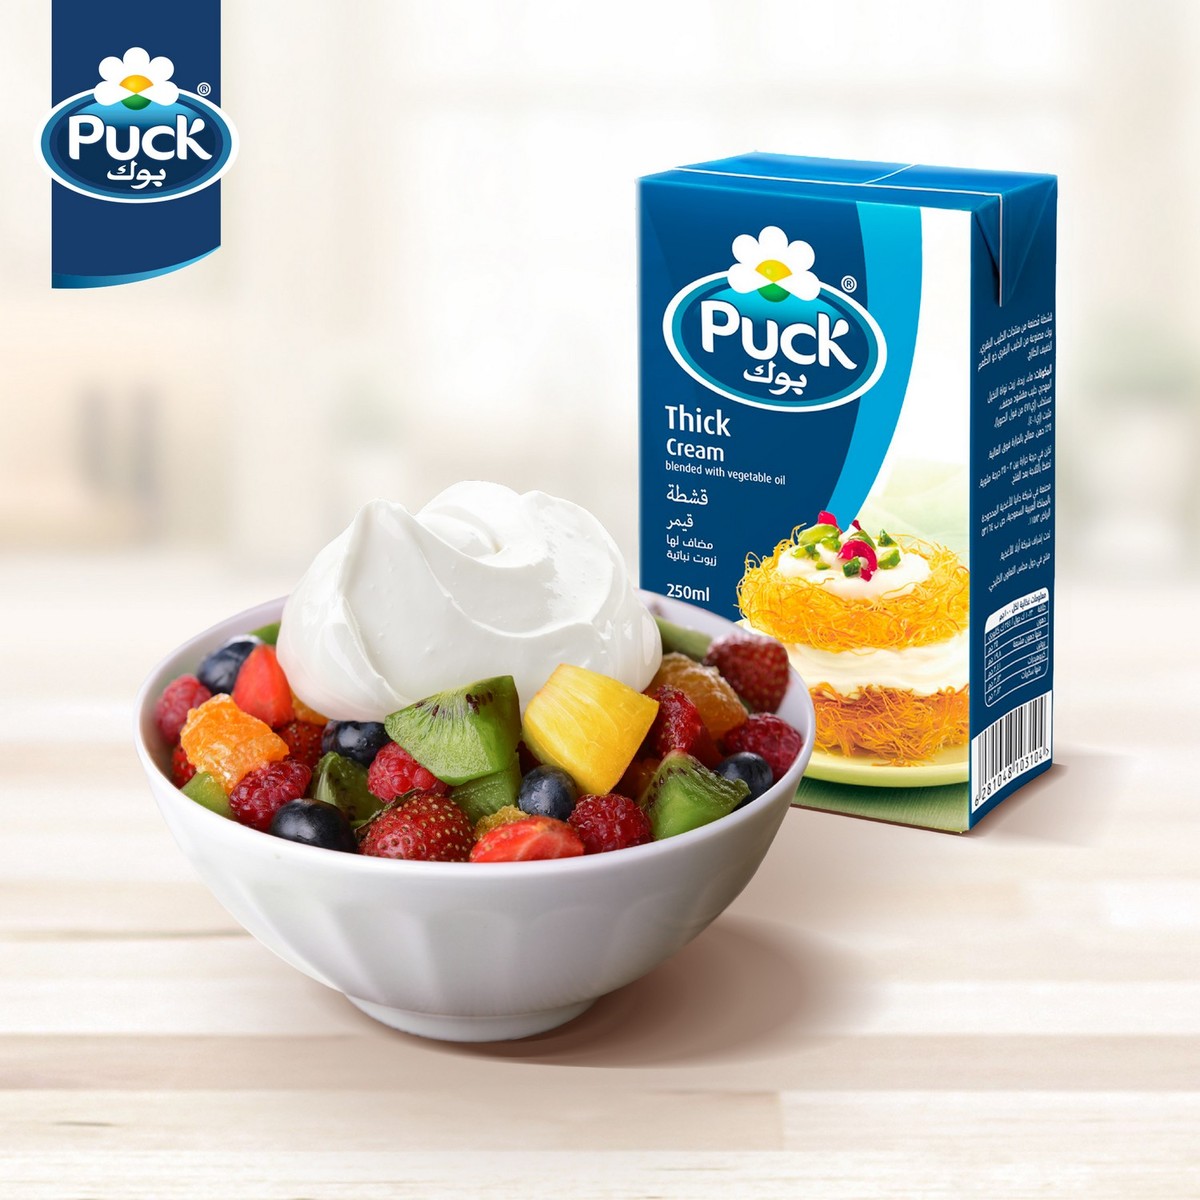 Puck Thick Cream Value Pack 4 x 125 ml